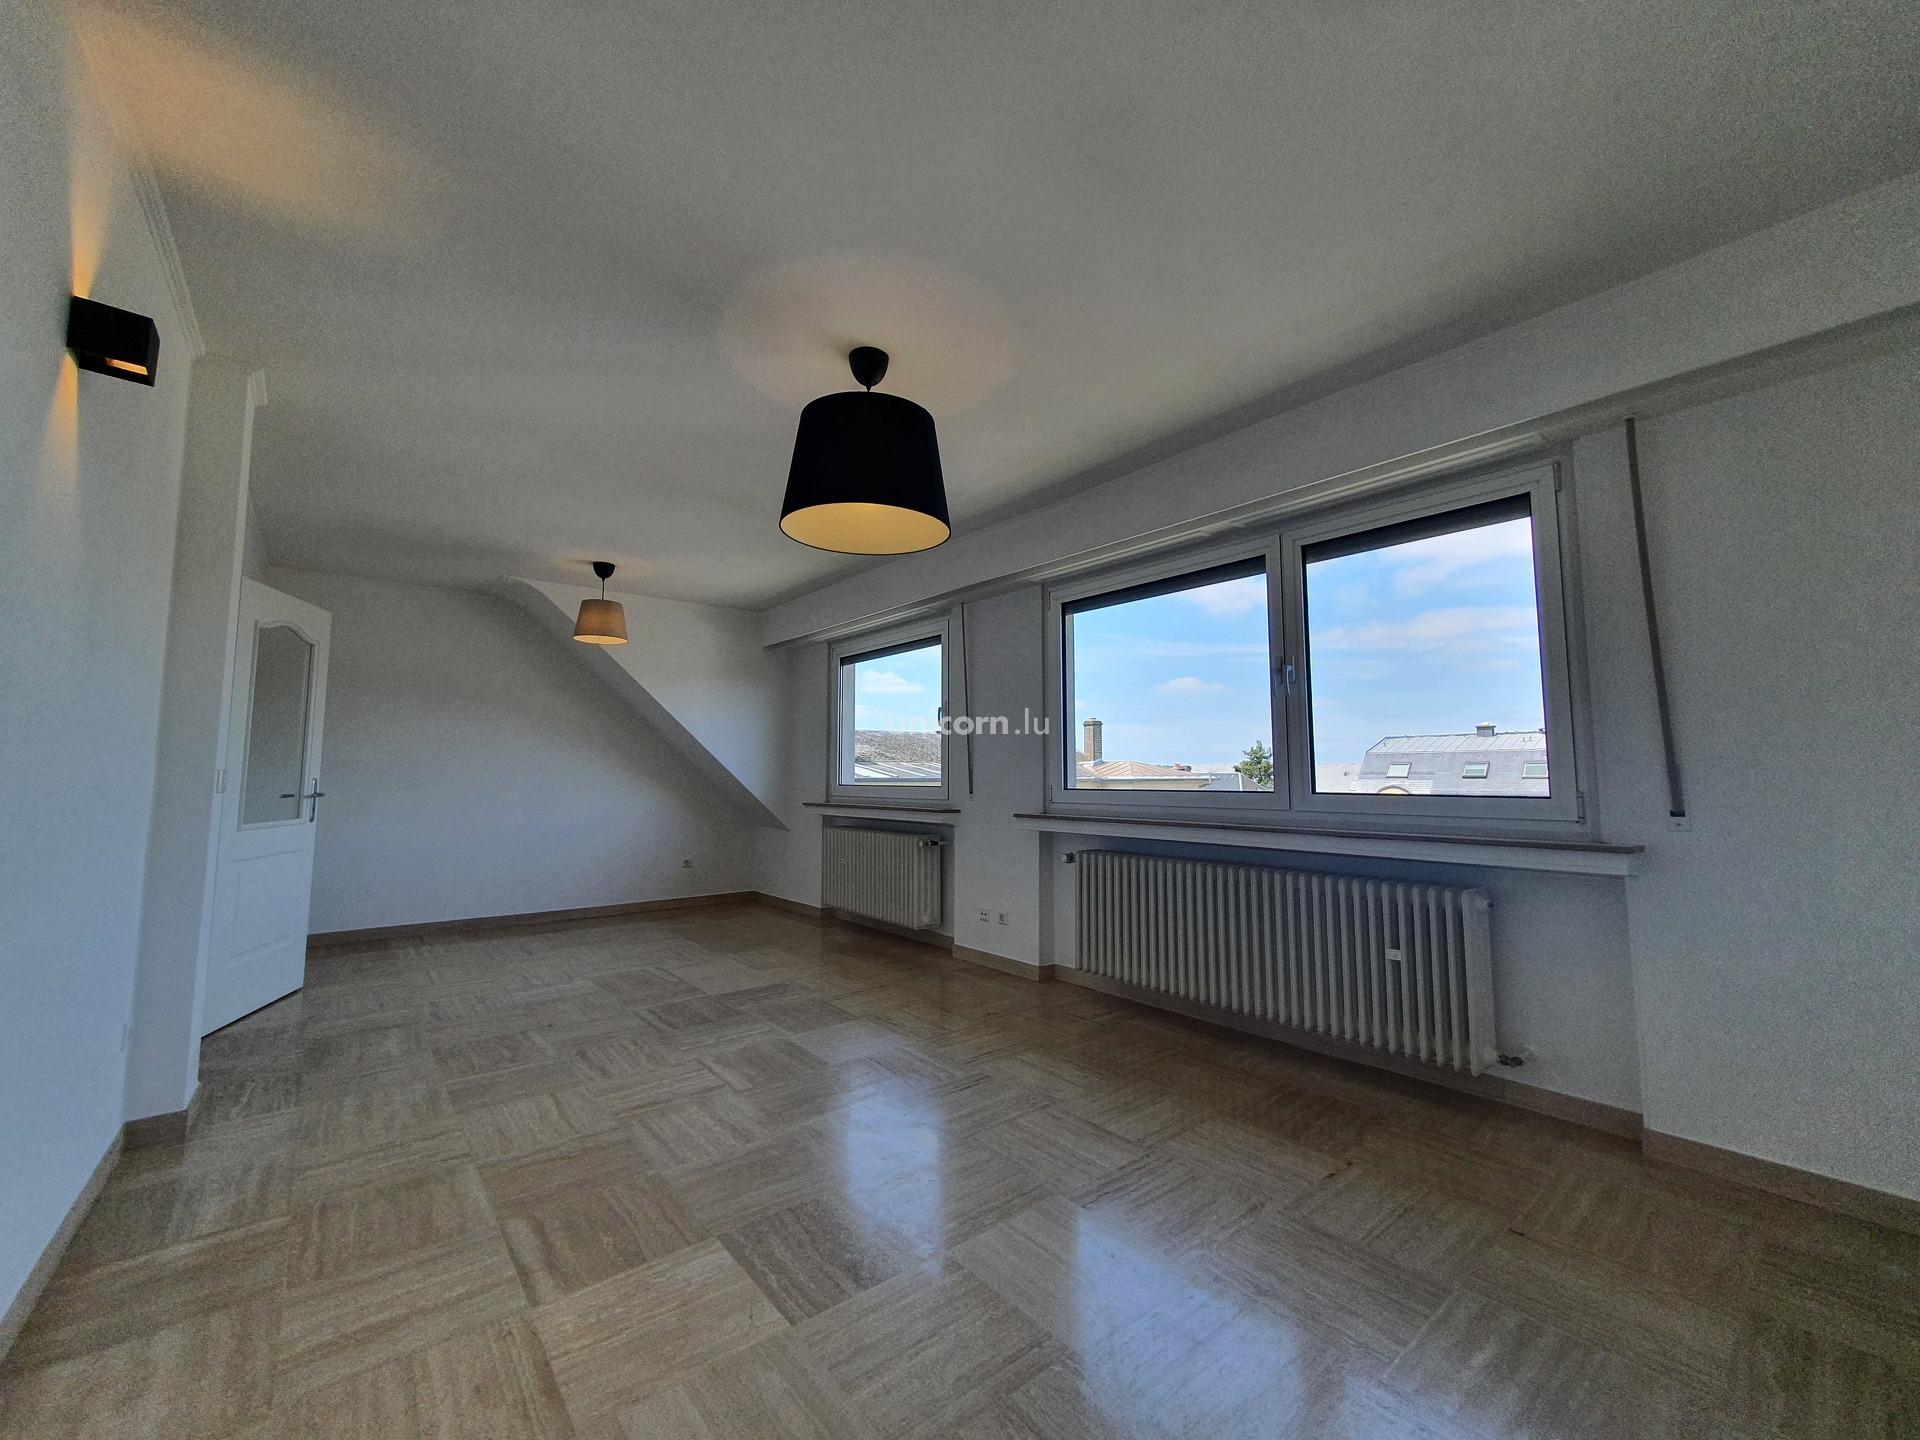 Apartment for rent in Luxembourg-Howald  - 75m²